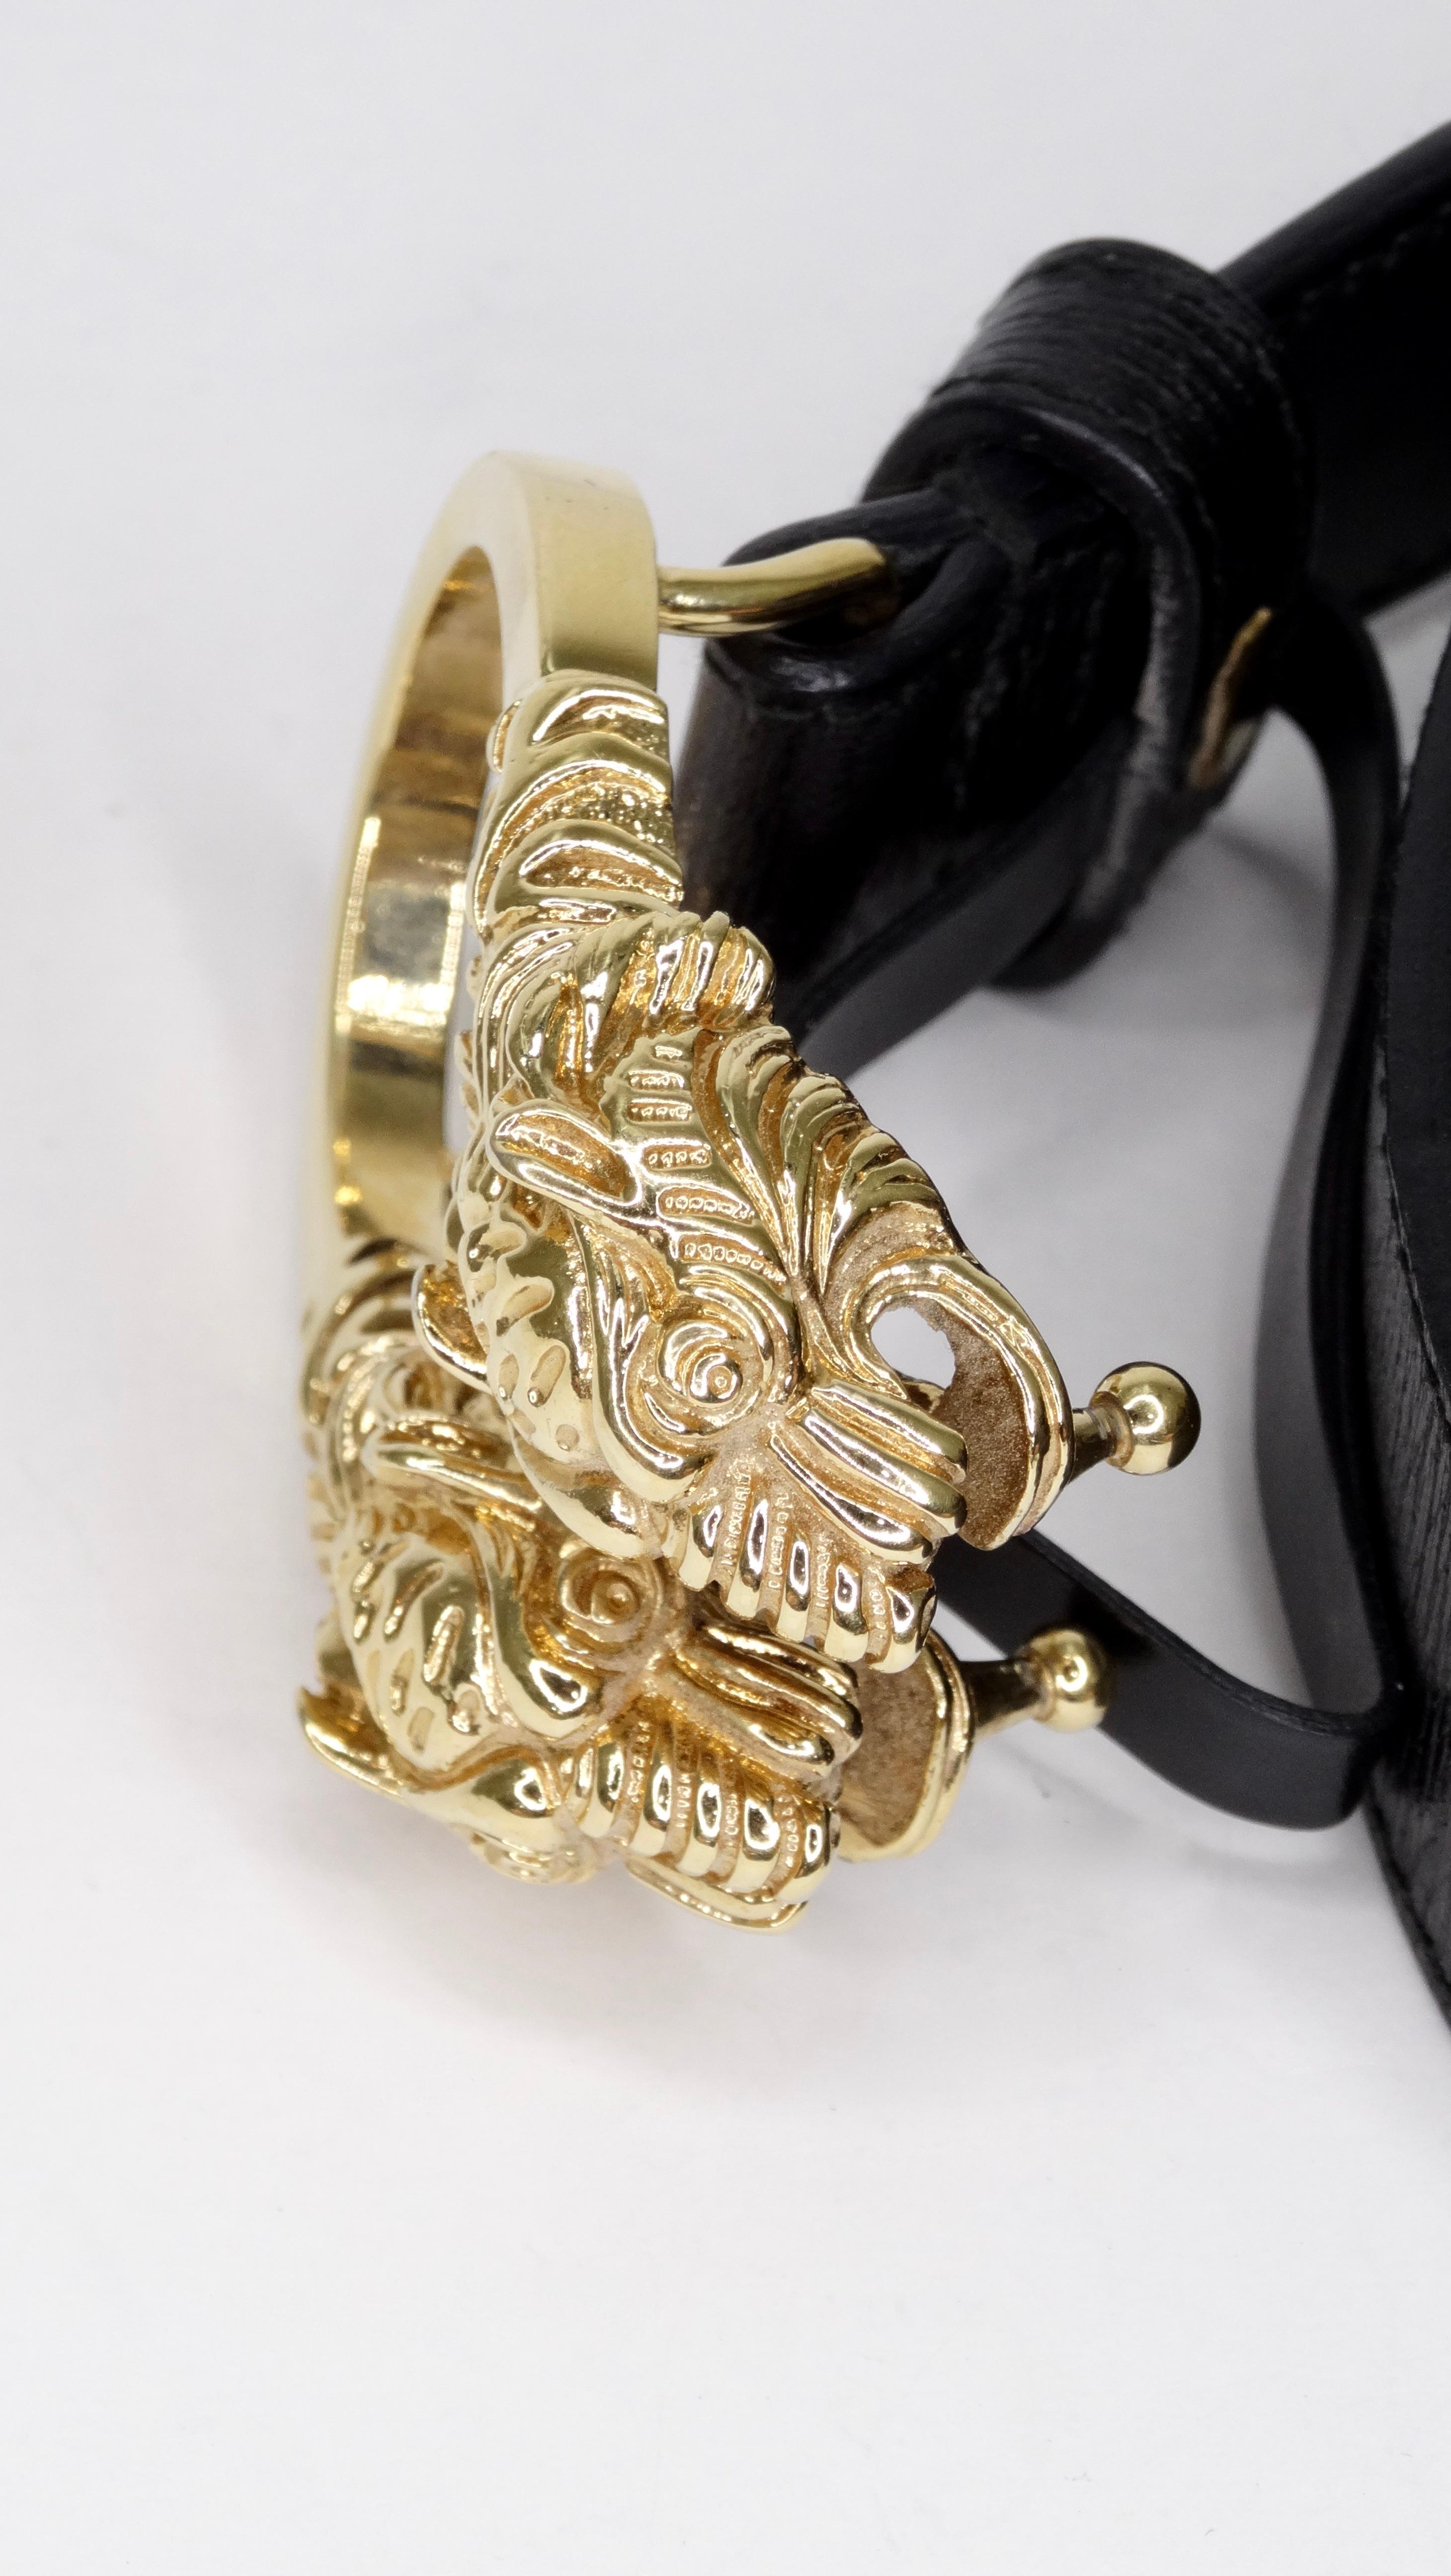 Score yourself a piece of classic Gucci with this amazing belt! Circa 1980s, this black leather belt features a Dionysus antiqued gold buckle-a unique detail referencing the Greek god Dionysus, who in myth is said to have crossed the river Tigris on